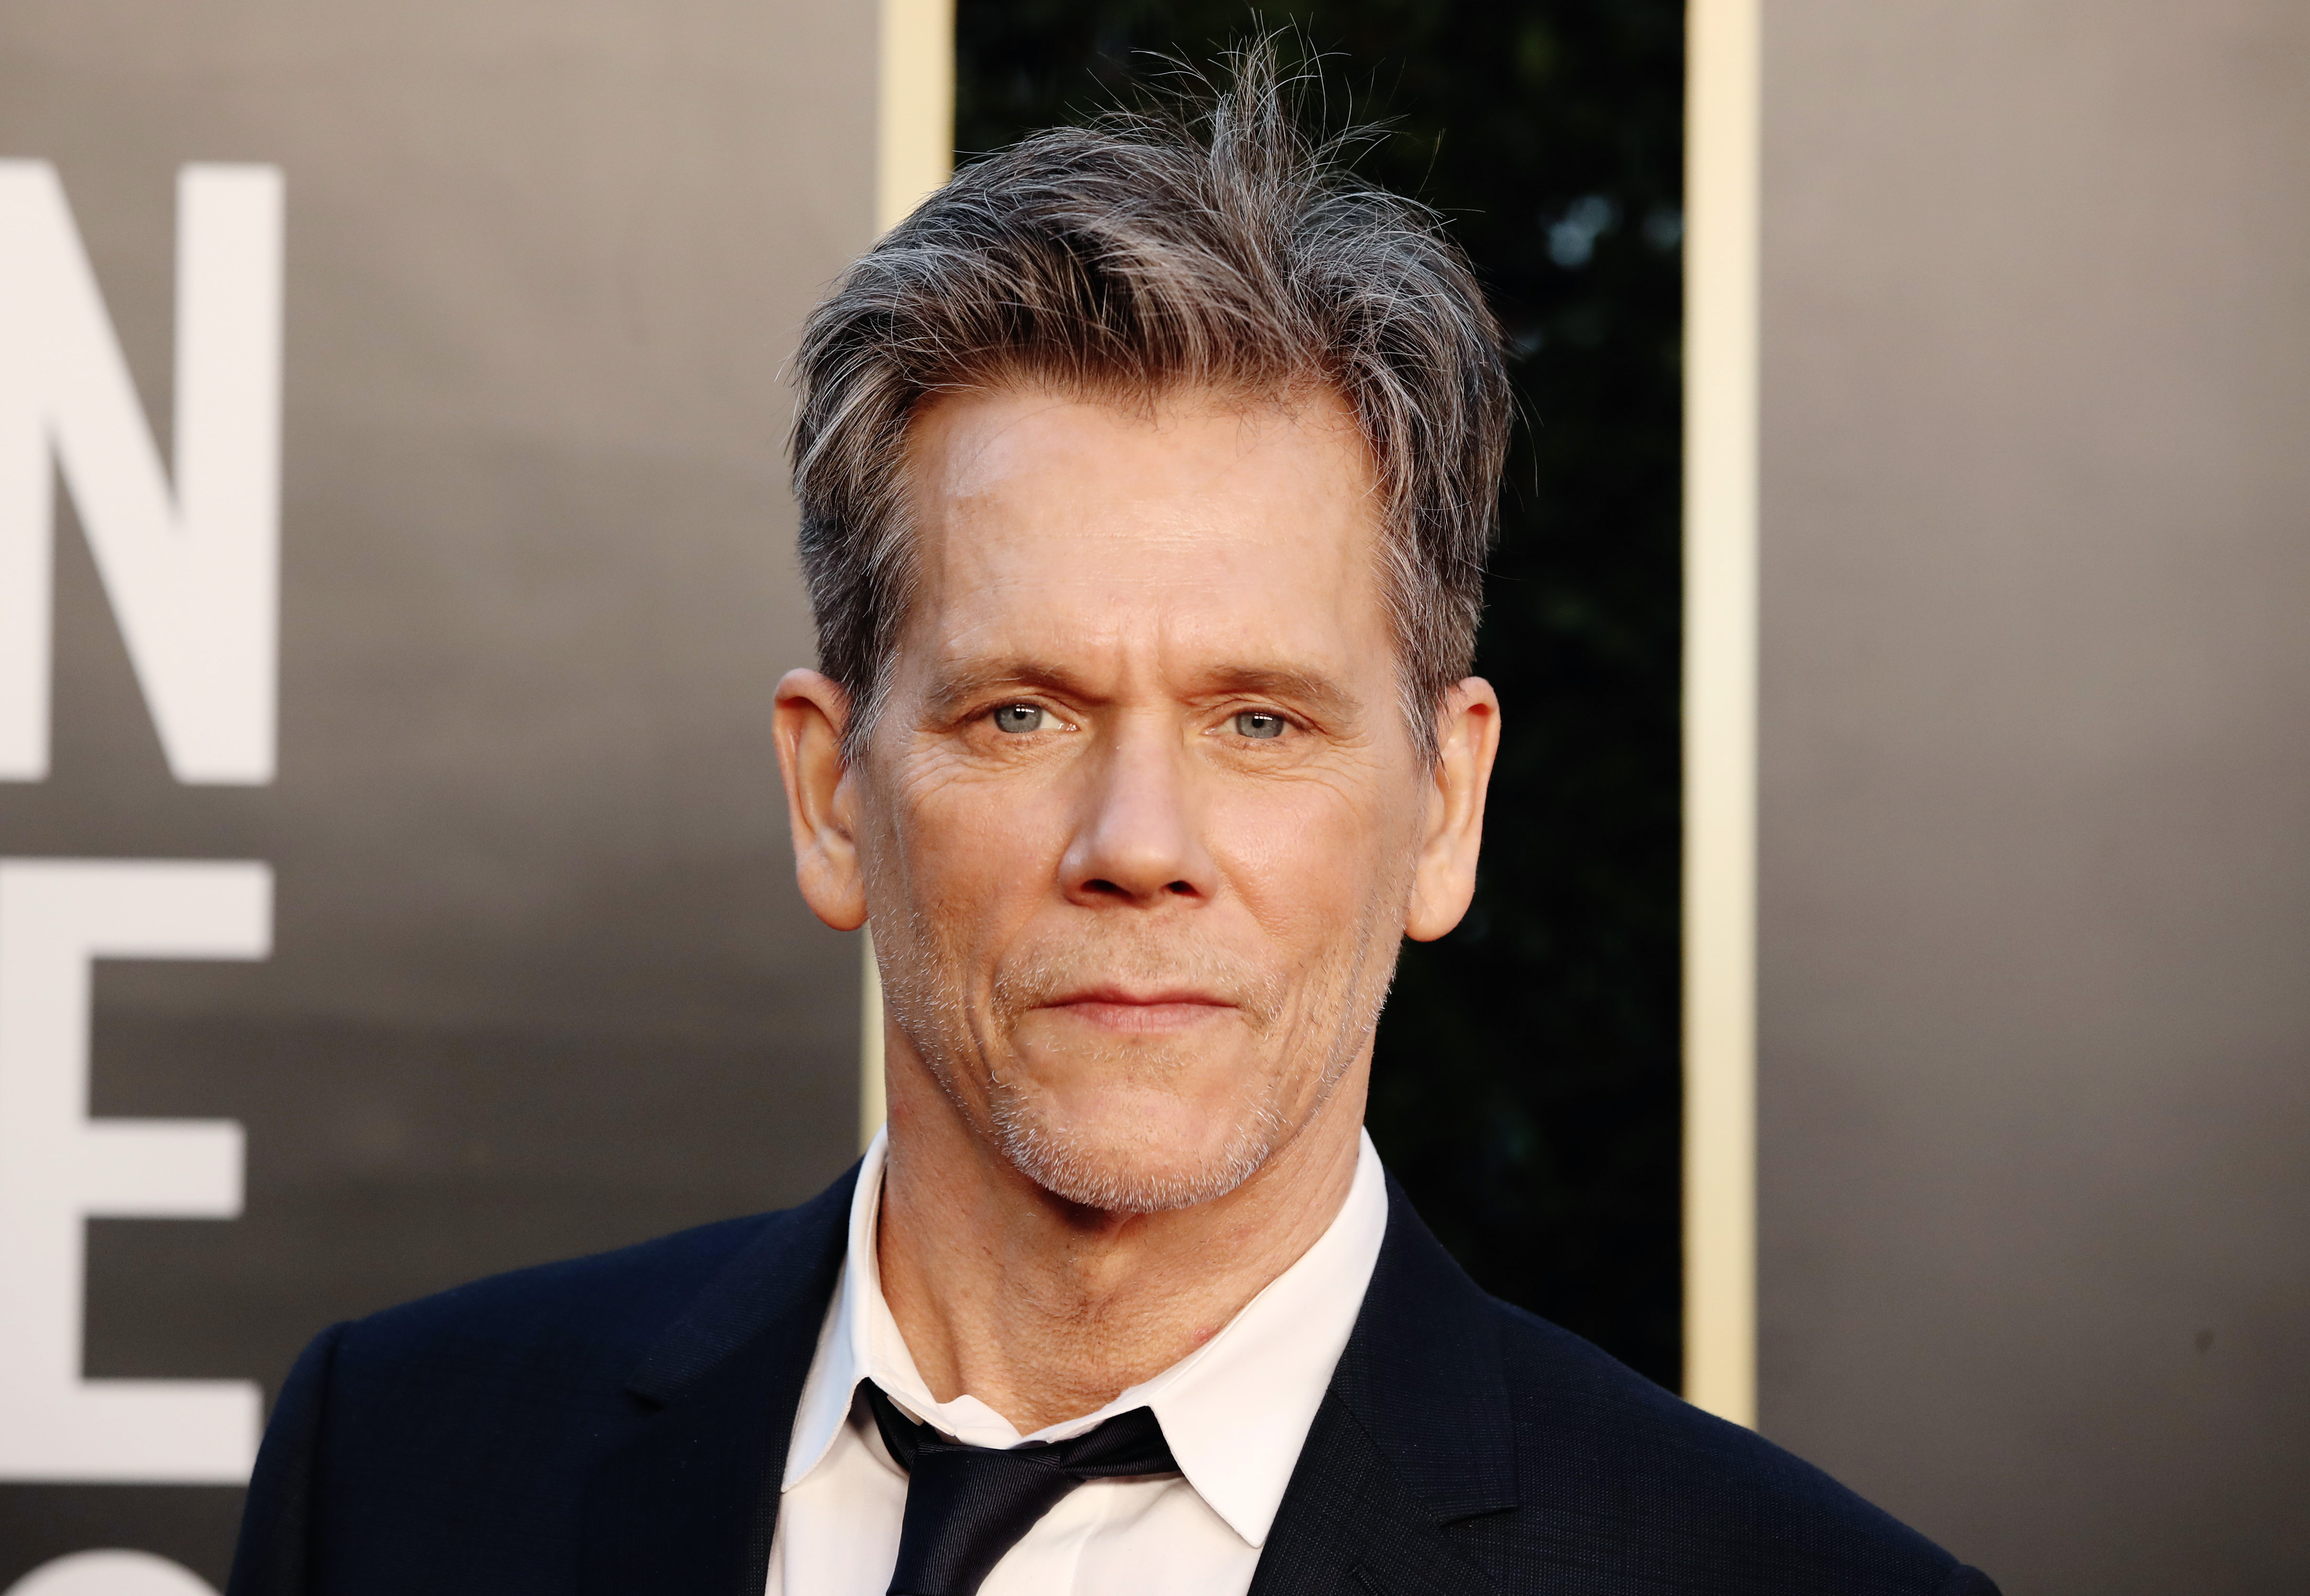 Kevin Bacon at the 78th Annual Golden Globe Awards in Beverly Hills, California on February 28, 2021 | Source: Getty Images